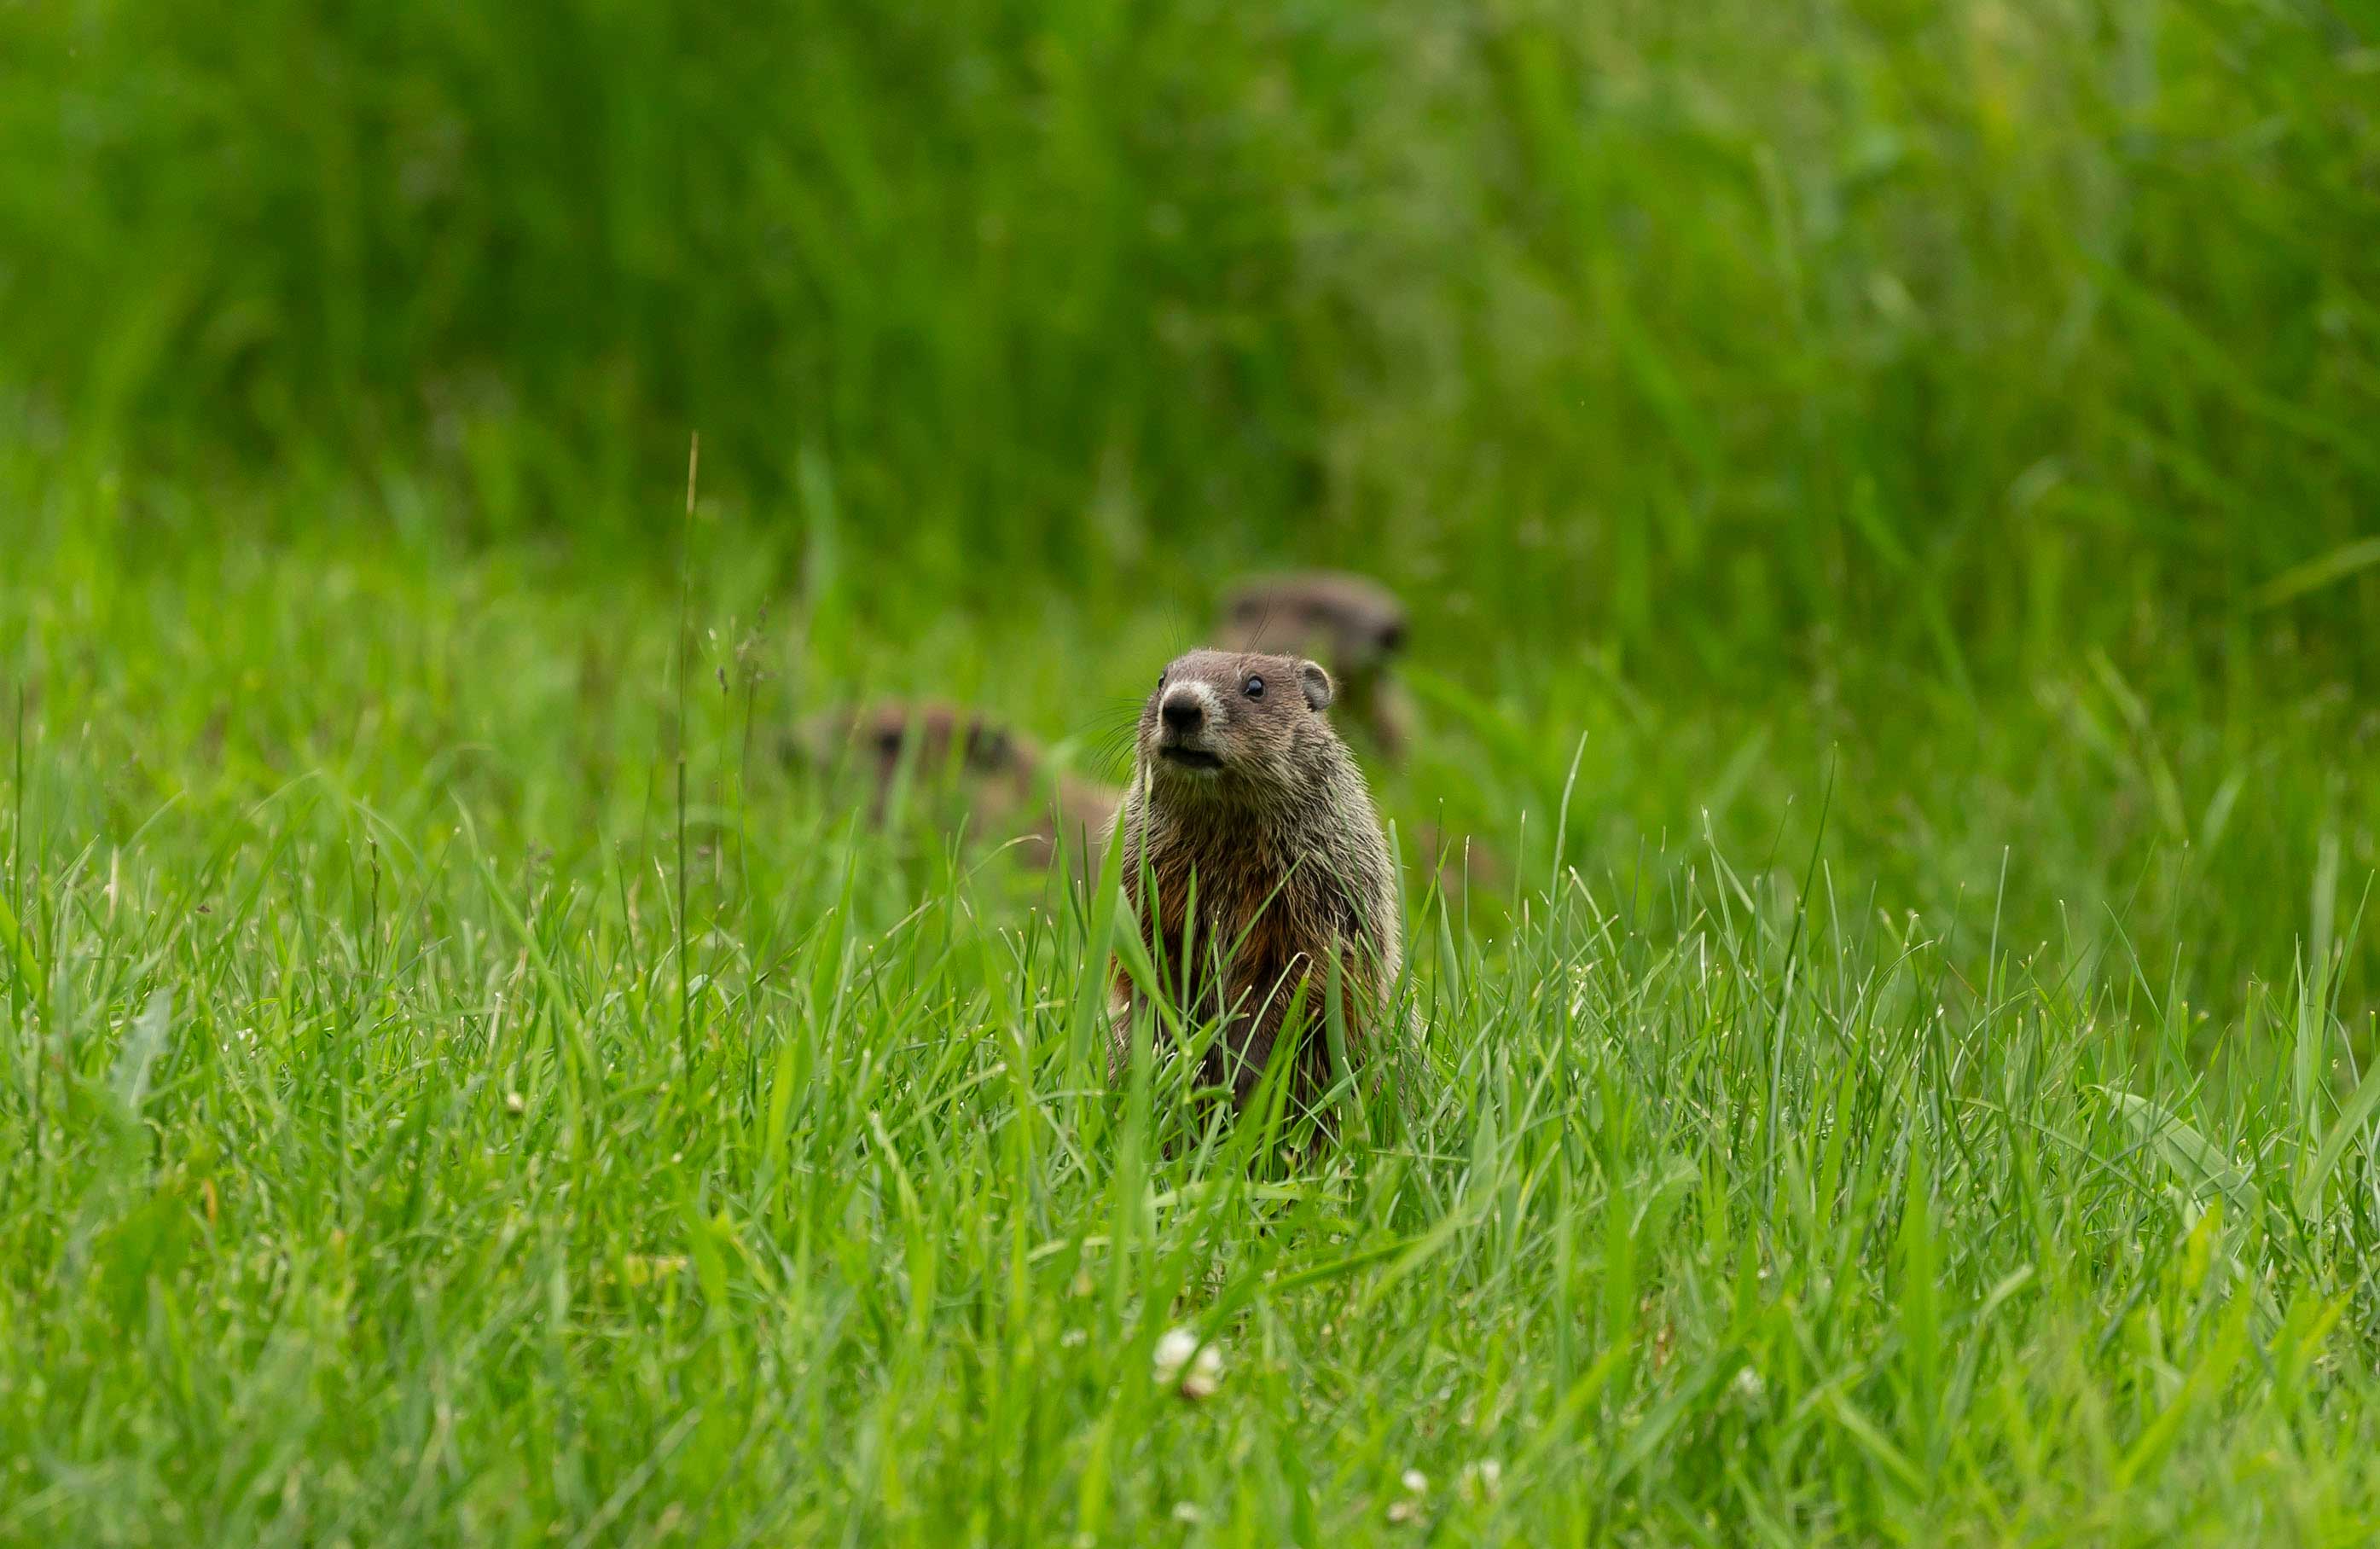 A groundhog standing in a field.